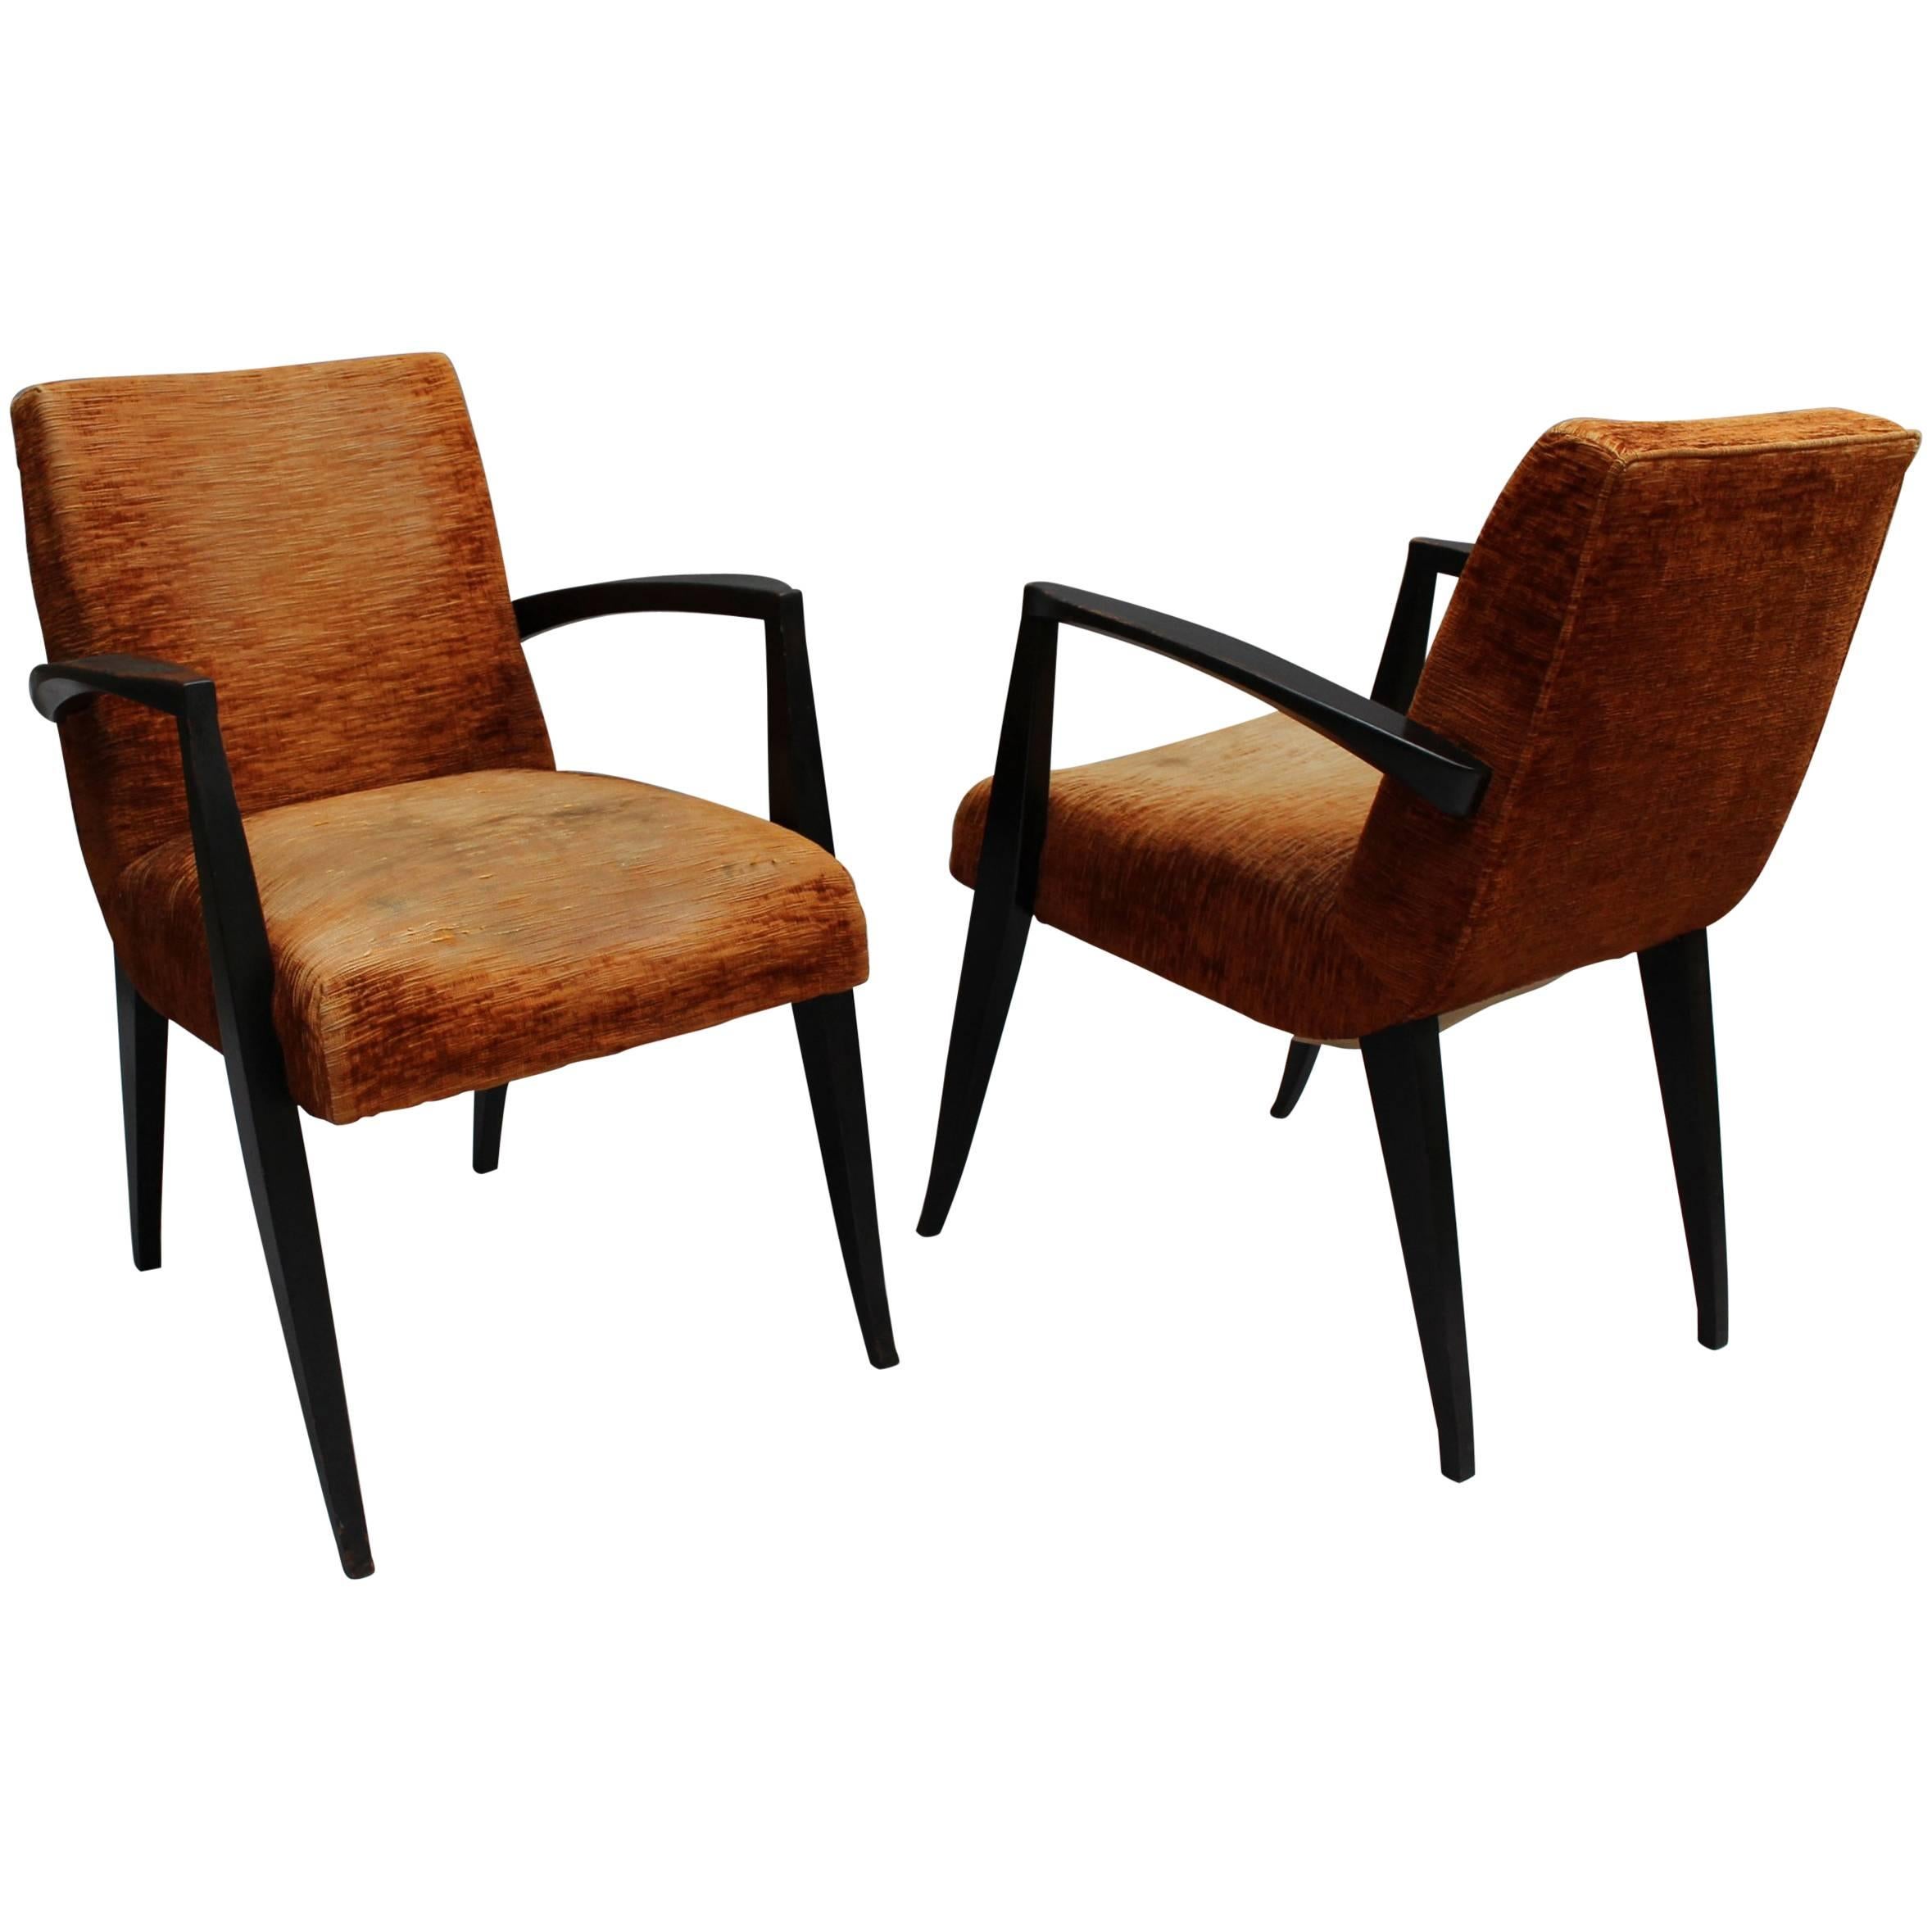 Pair of Fine French Art Deco Arm Chairs by Maxime Old